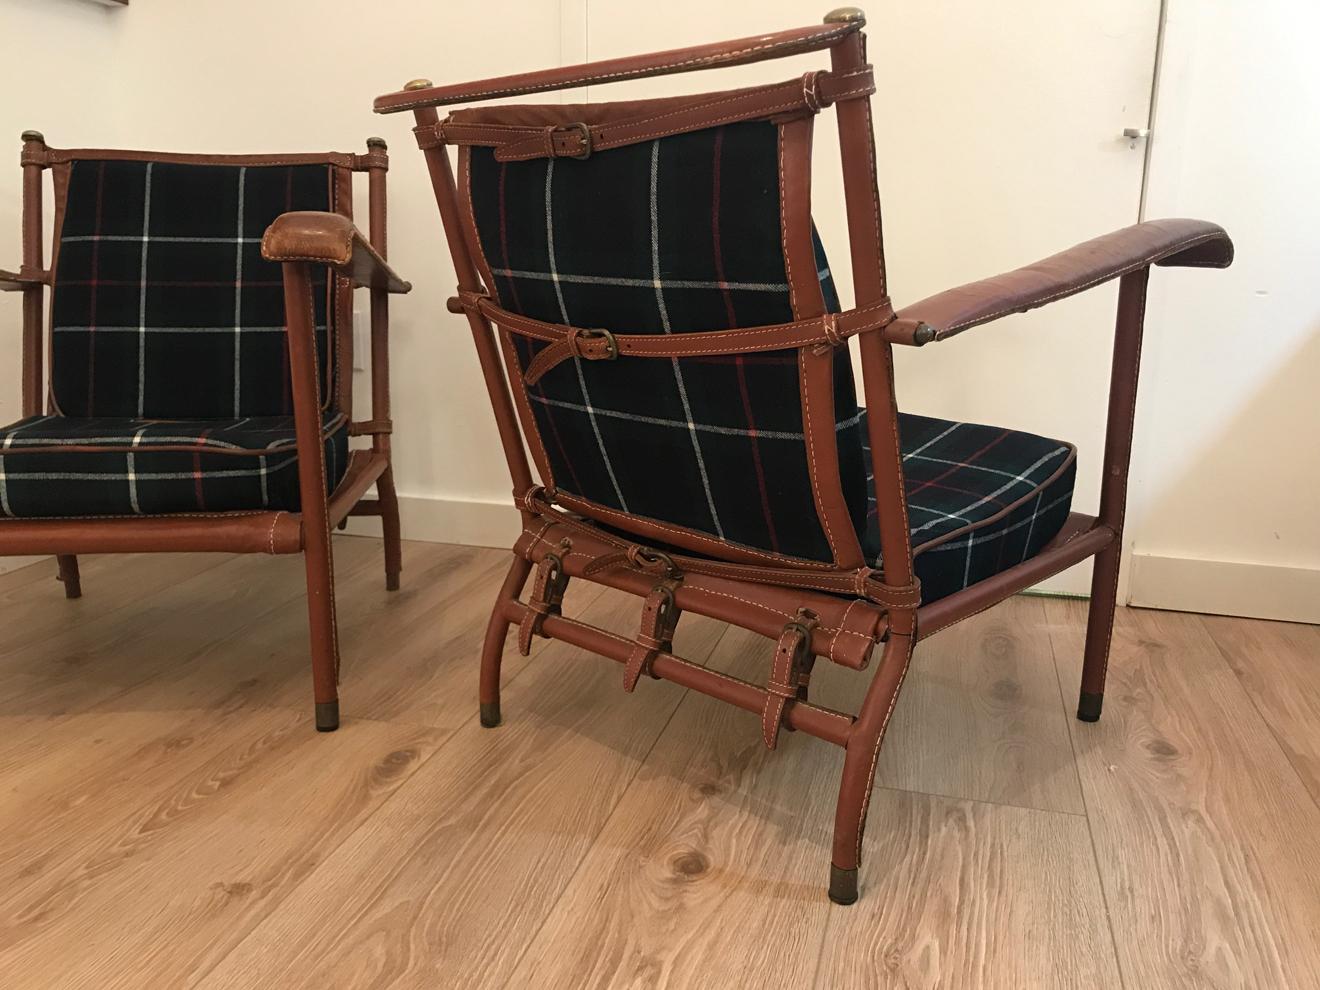 Rare pair of Jacques Adnet lounge chairs with new tartan plaid wool upholstery. Original brown hand-stitched leather in good vintage condition.
Priced per pair. Four lounge chairs available.
FREE SHIPPING: White Glove to Continental US.